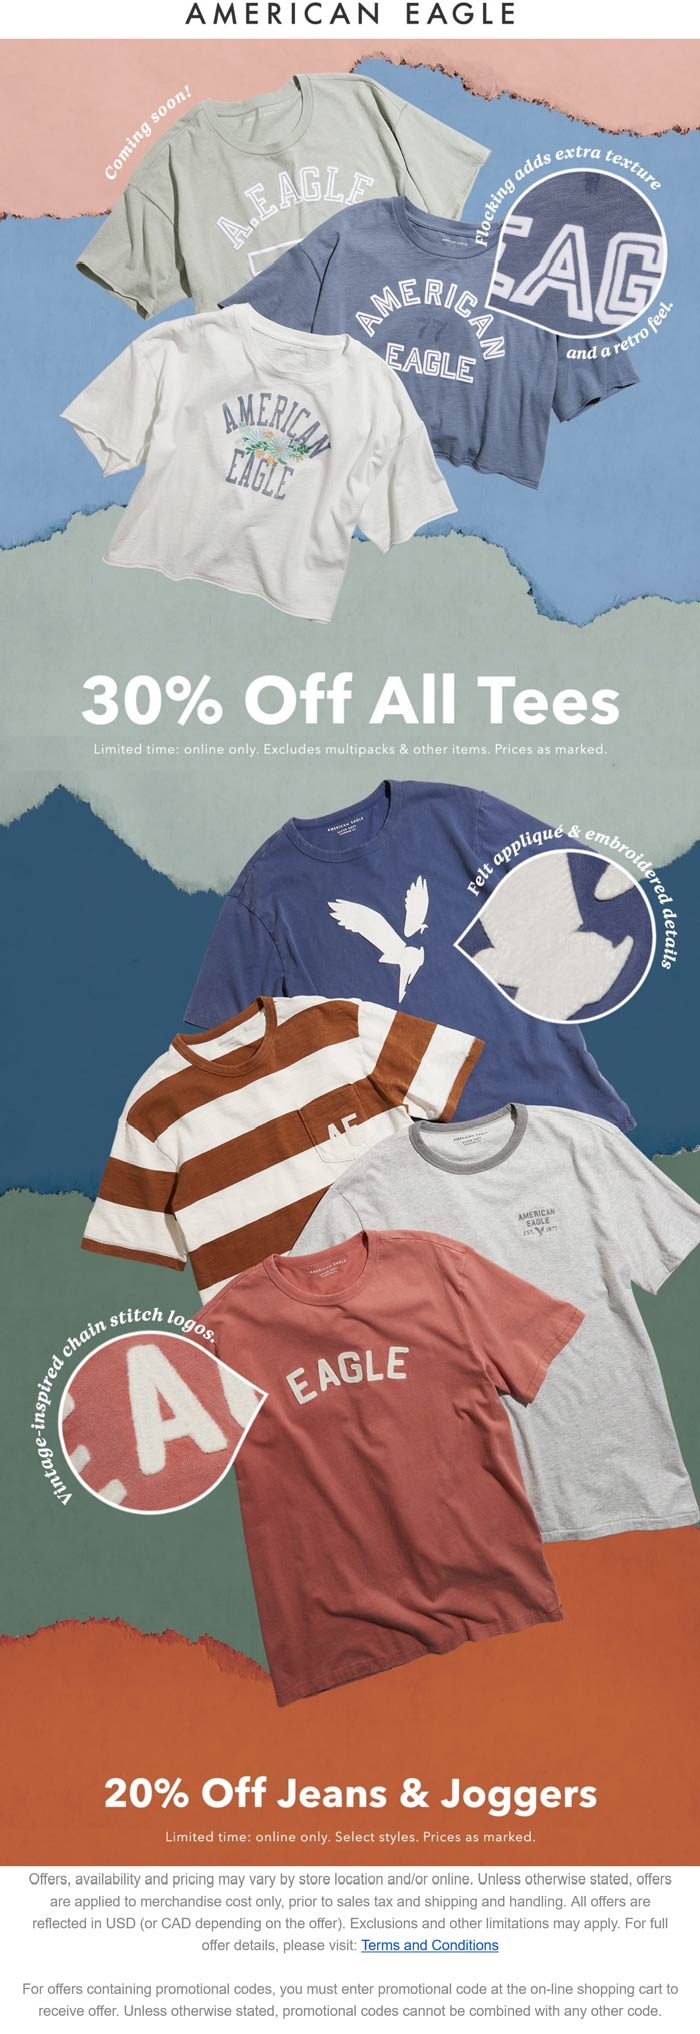 American Eagle coupons & promo code for [November 2022]